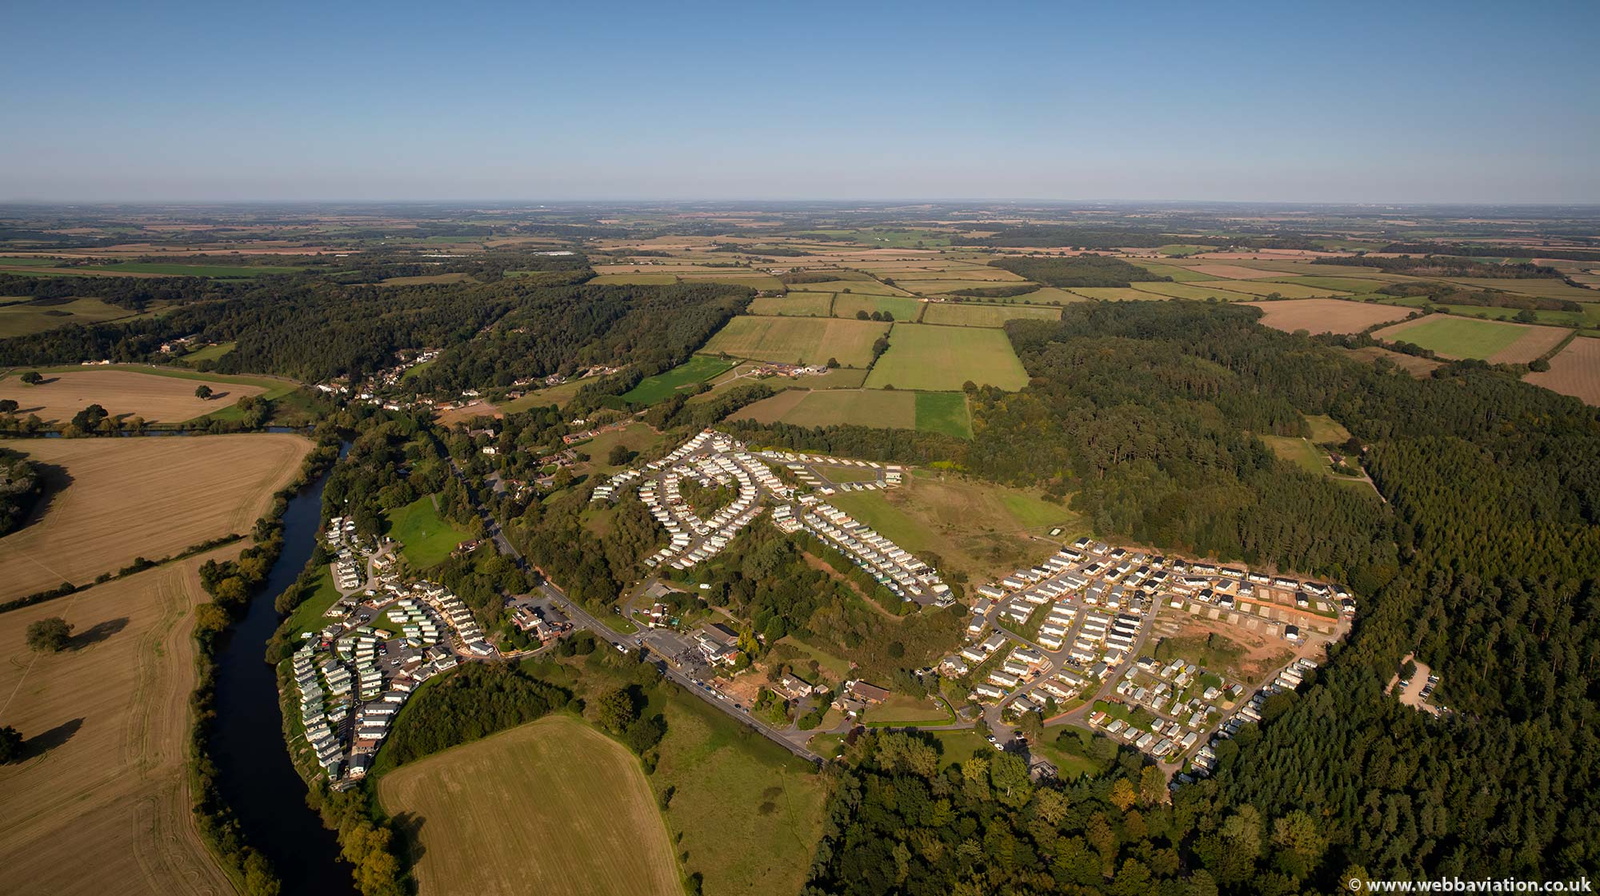 Caravan Parks along the River Severn  from the air